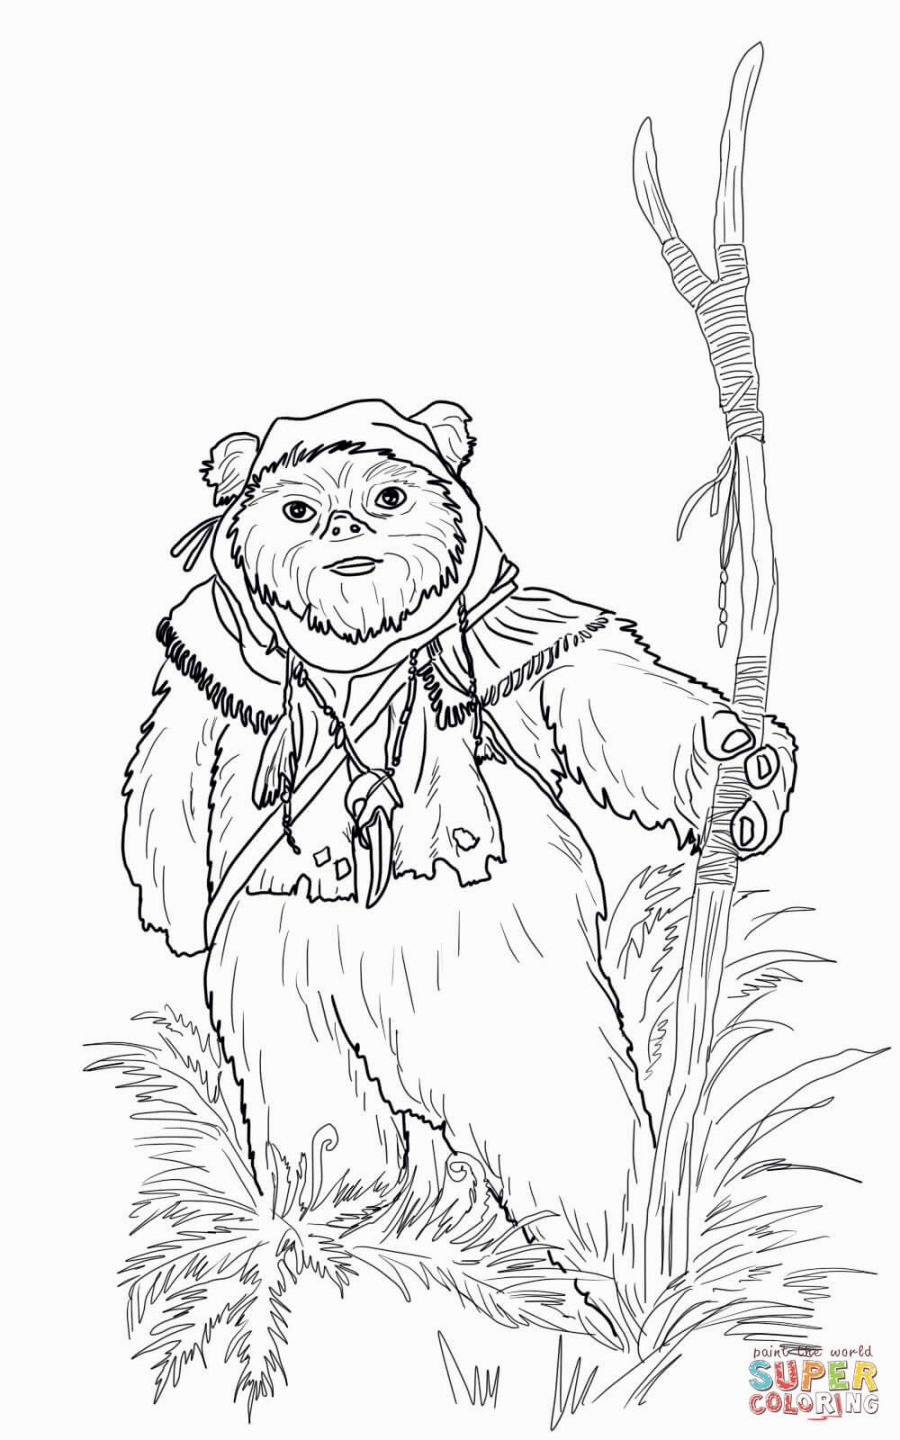 Ewoks Coloring Pages
 Ewok Coloring Pages – Coloring Pages